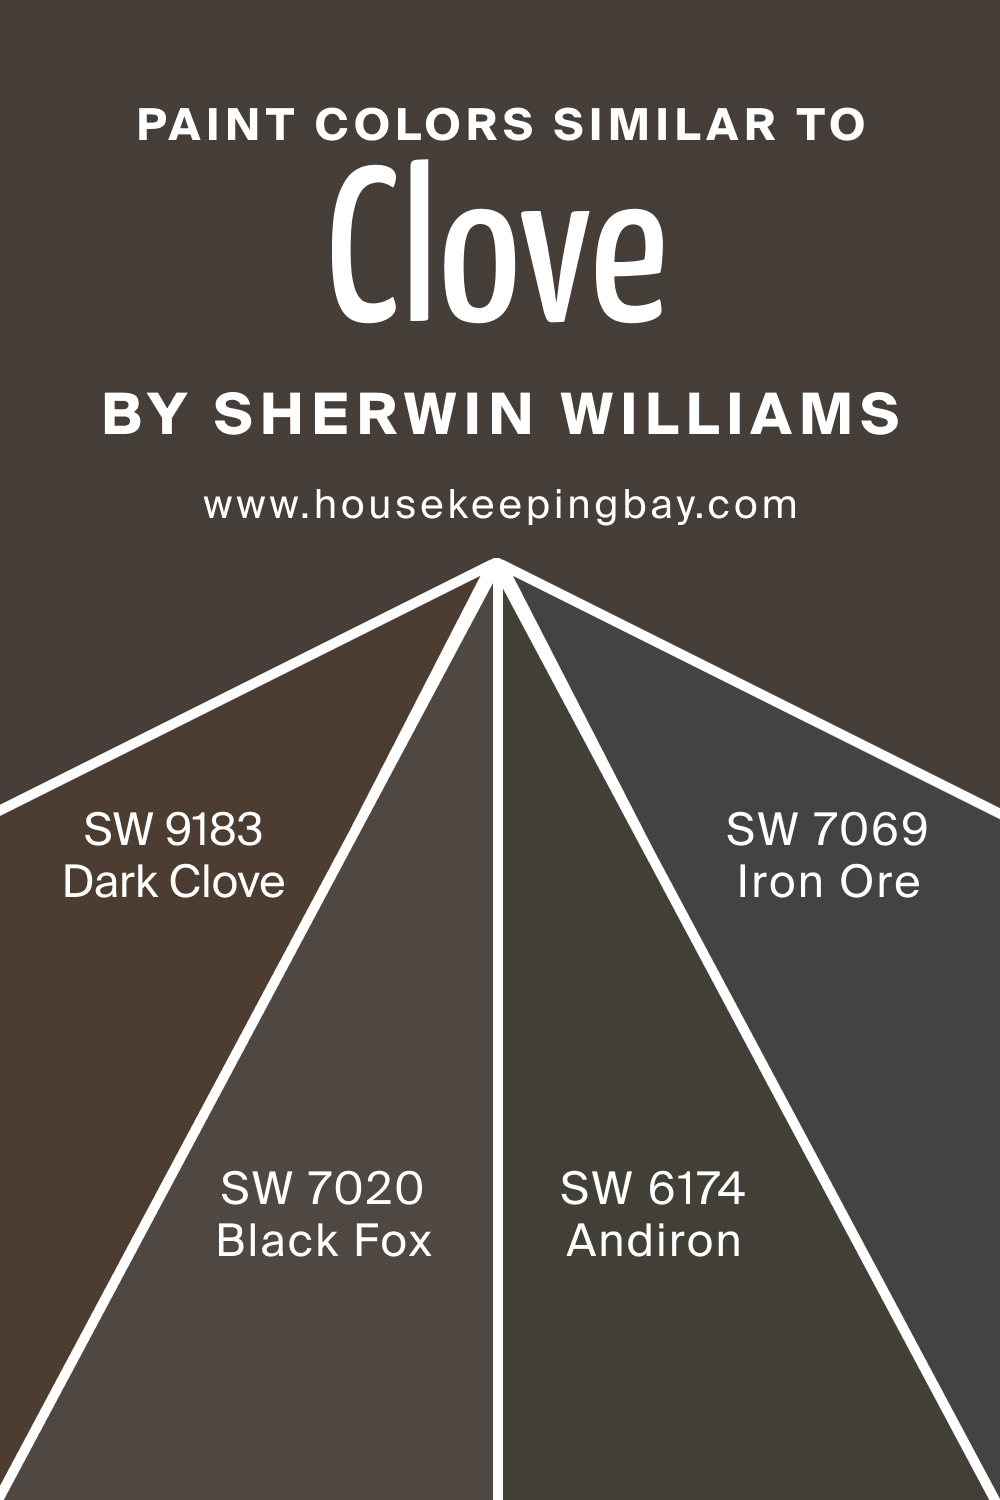 Paint Color Similar to SW 9605 Clove by Sherwin Williams